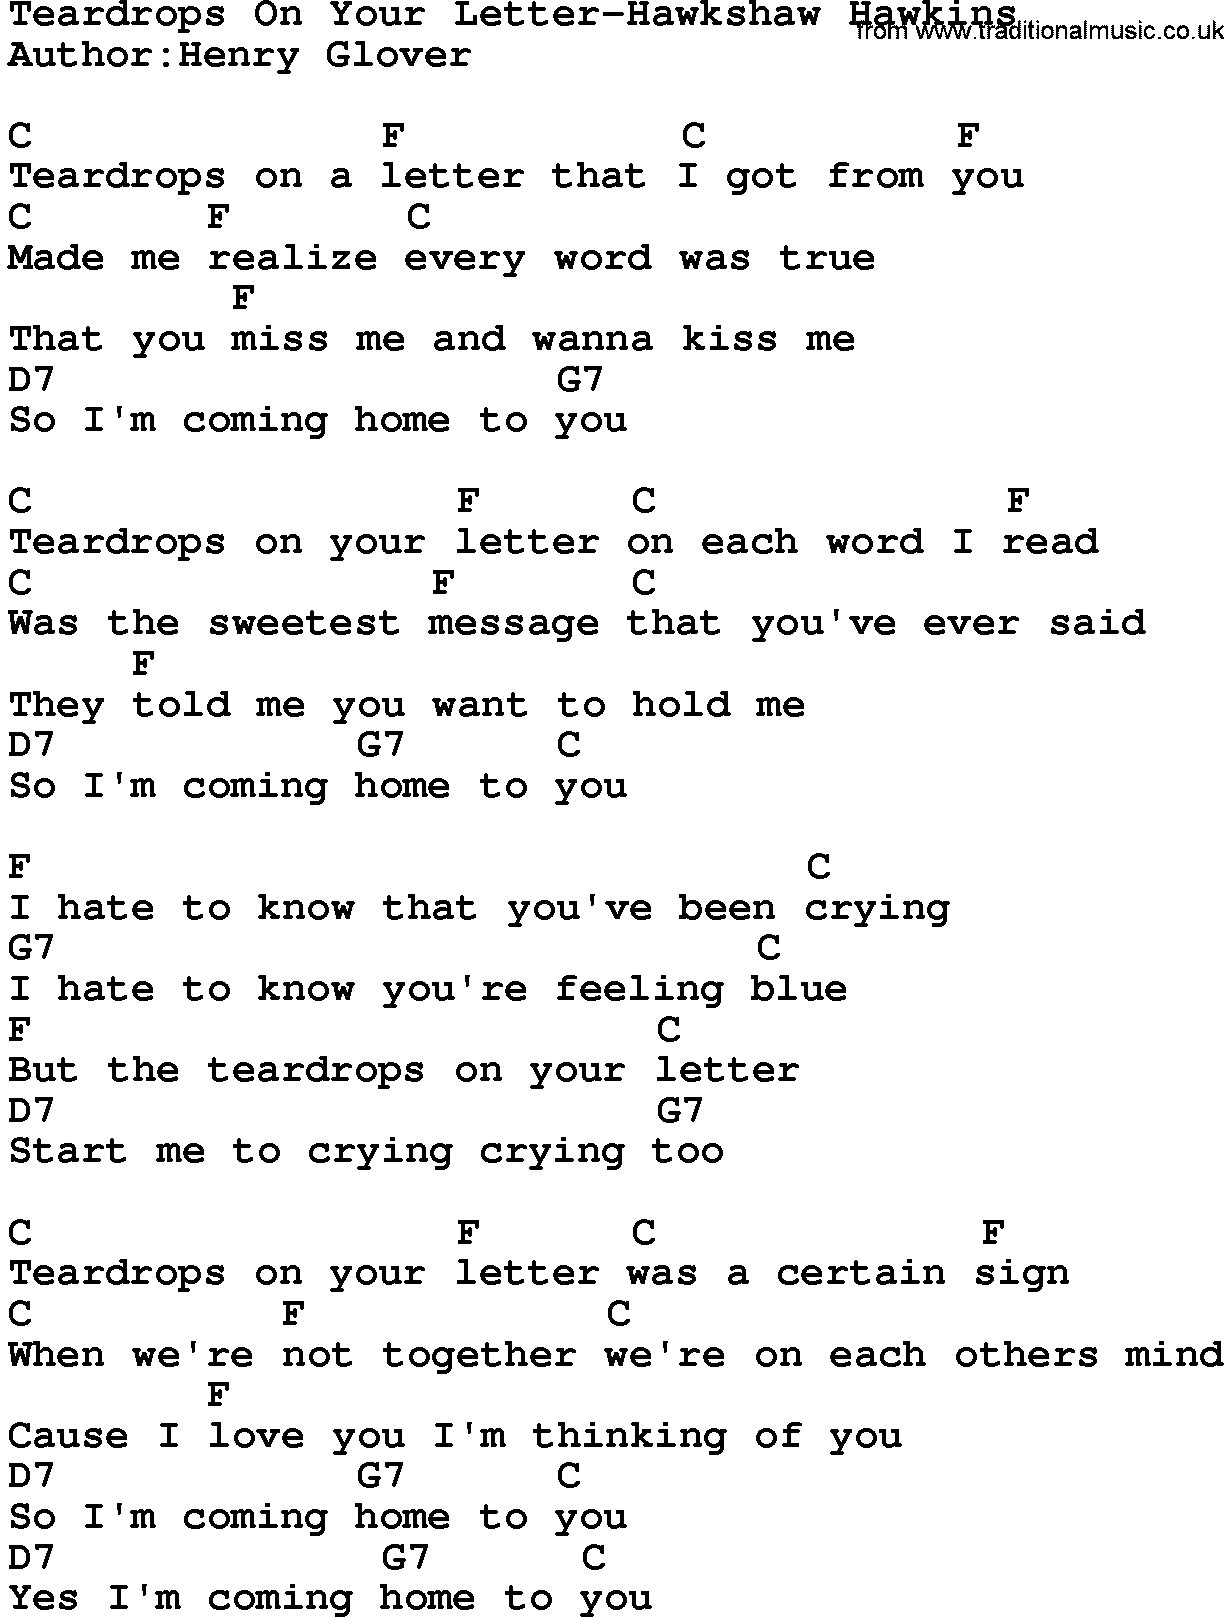 Country music song: Teardrops On Your Letter-Hawkshaw Hawkins lyrics and chords